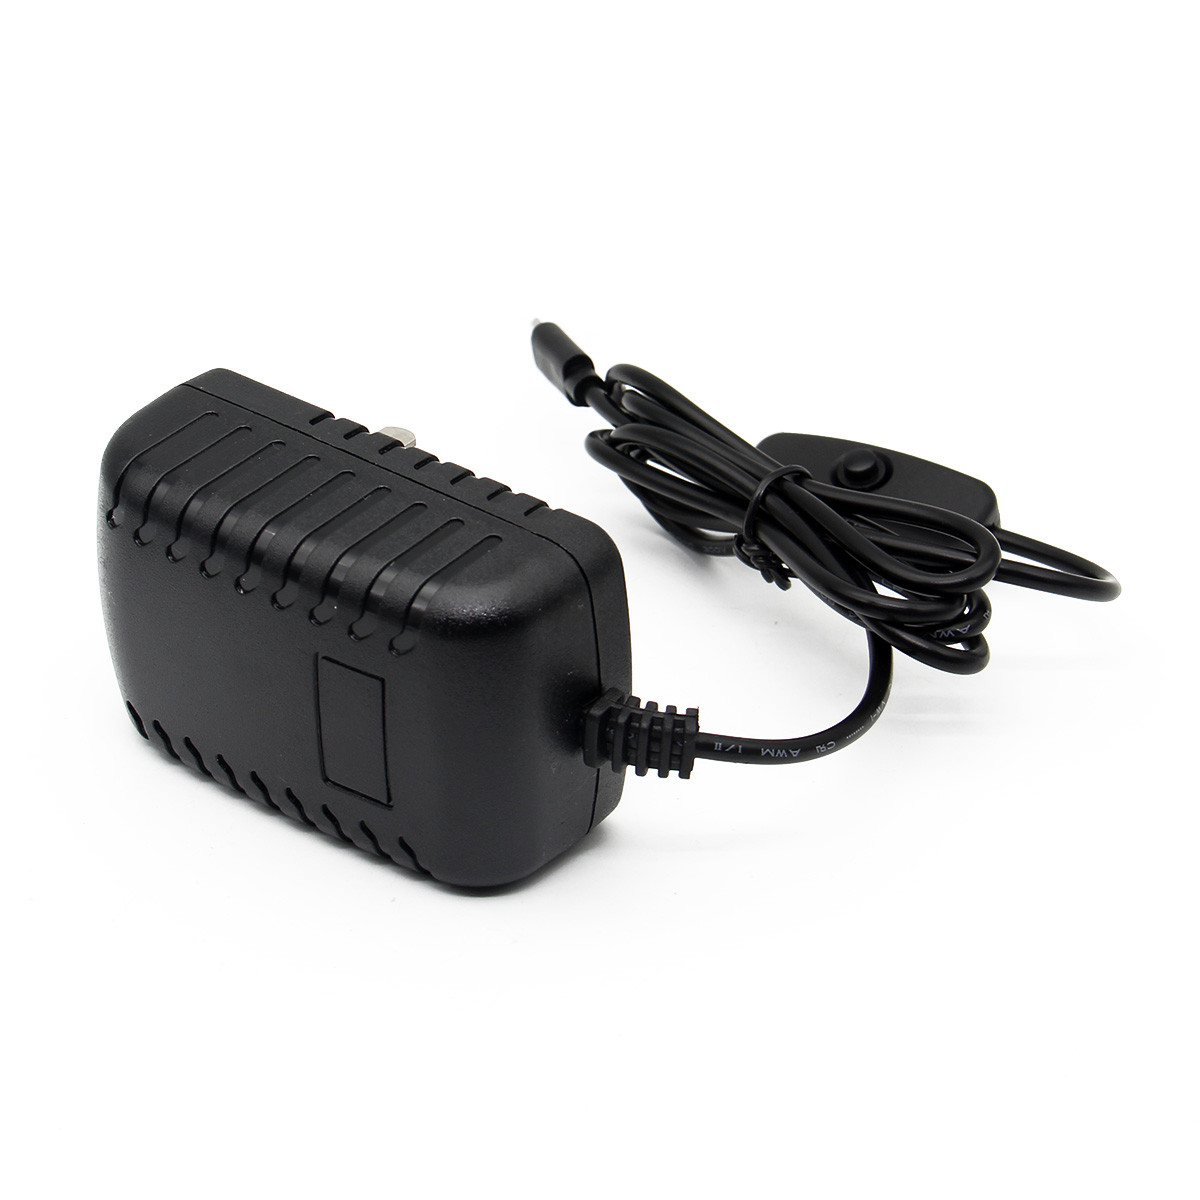 Geekworm US Standard DC 5V 3.0A Power Supply Adapter with Switch For Raspberry Pi 8